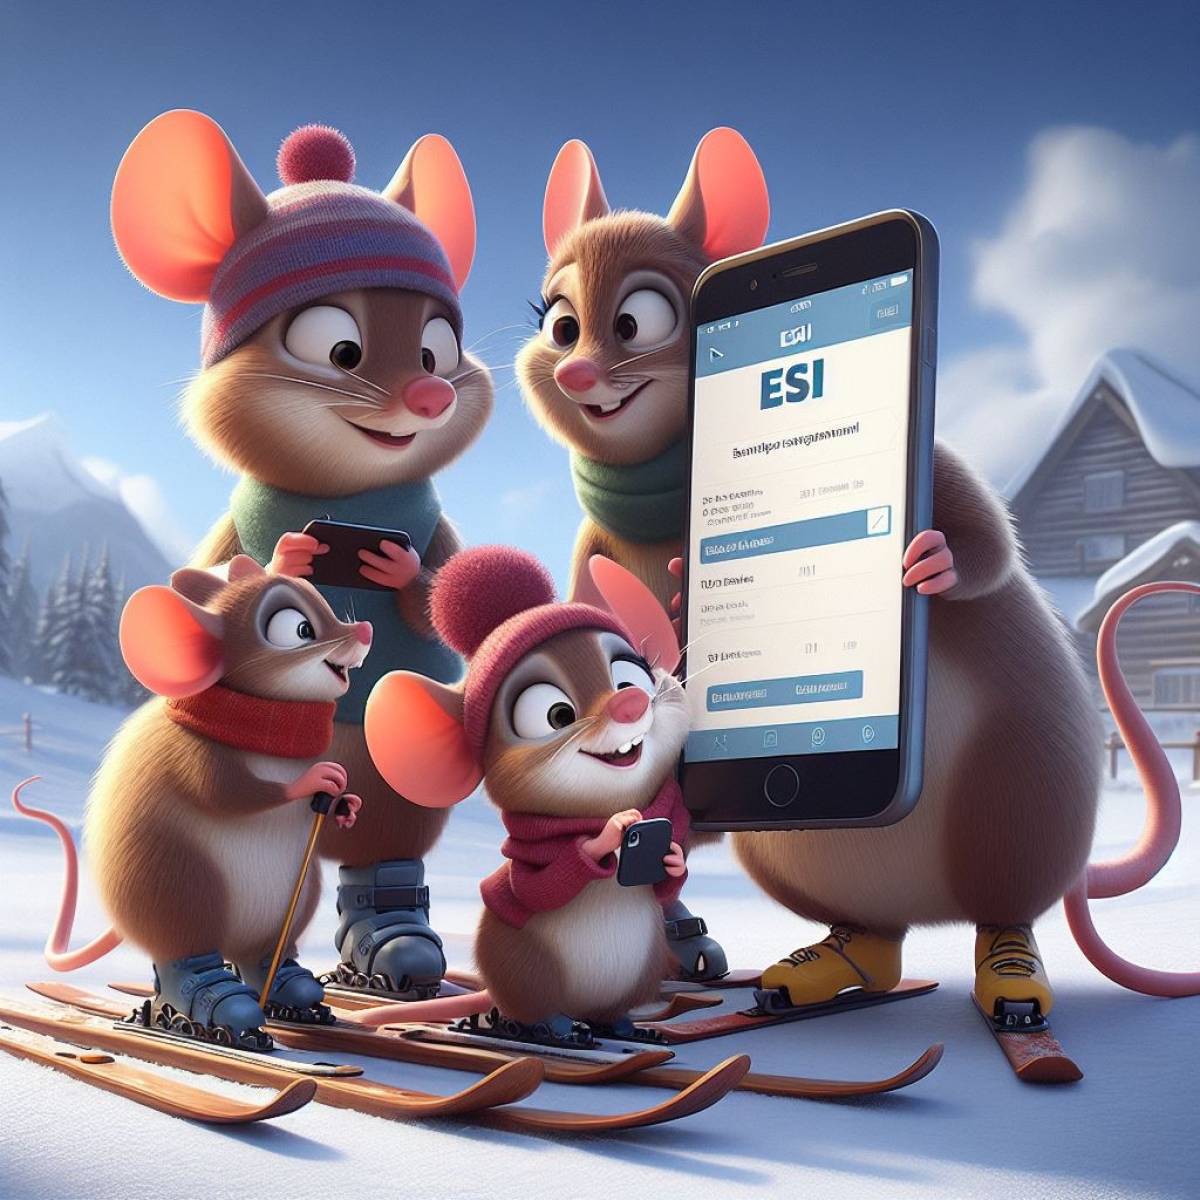 ESI innovates with a mobile app to track your skiing and snowboarding progress.